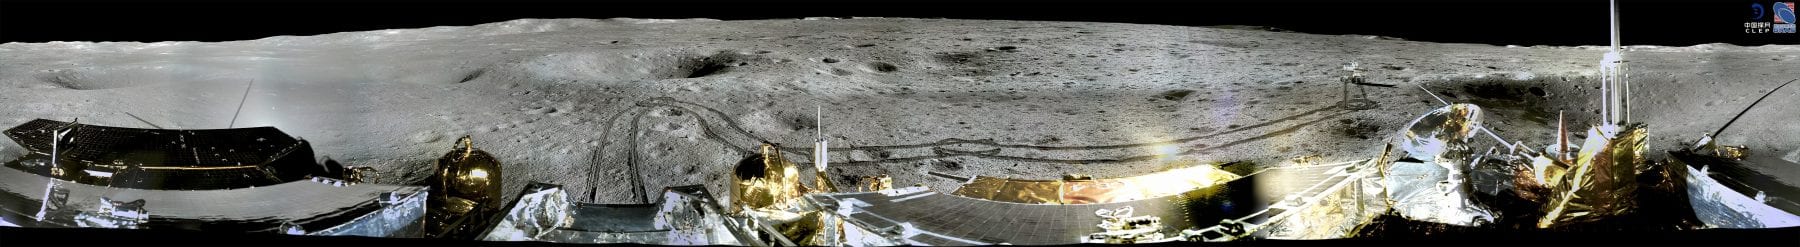 Another 360-degree circular shot image from the far side of the Moon. Credit: CLEP/ Lunar and Planetary Multimedia Database